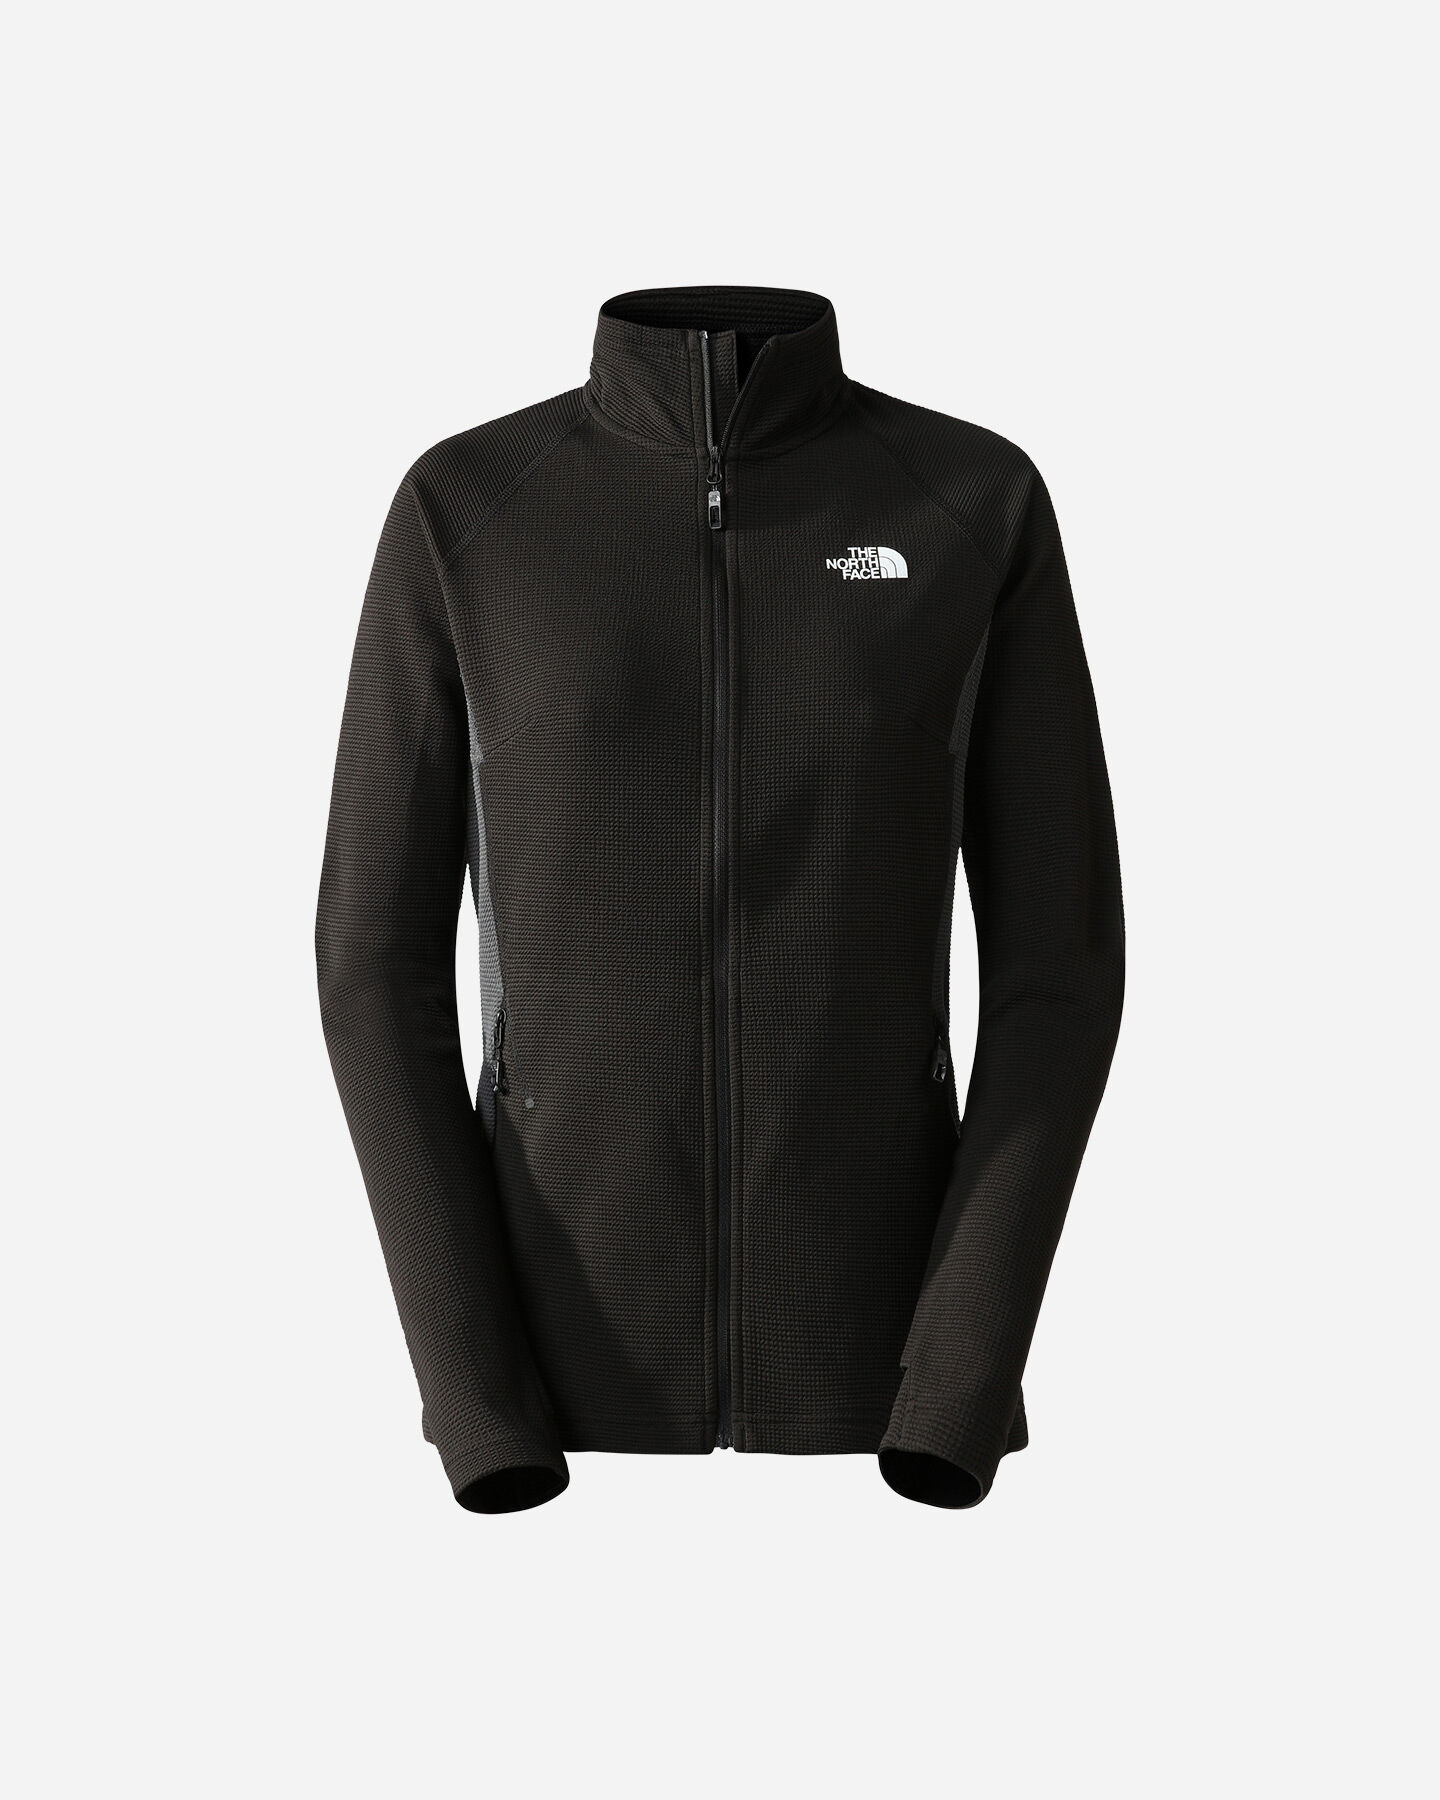  Pile THE NORTH FACE SMALL LOGO W S5537128|KT0|XS scatto 0